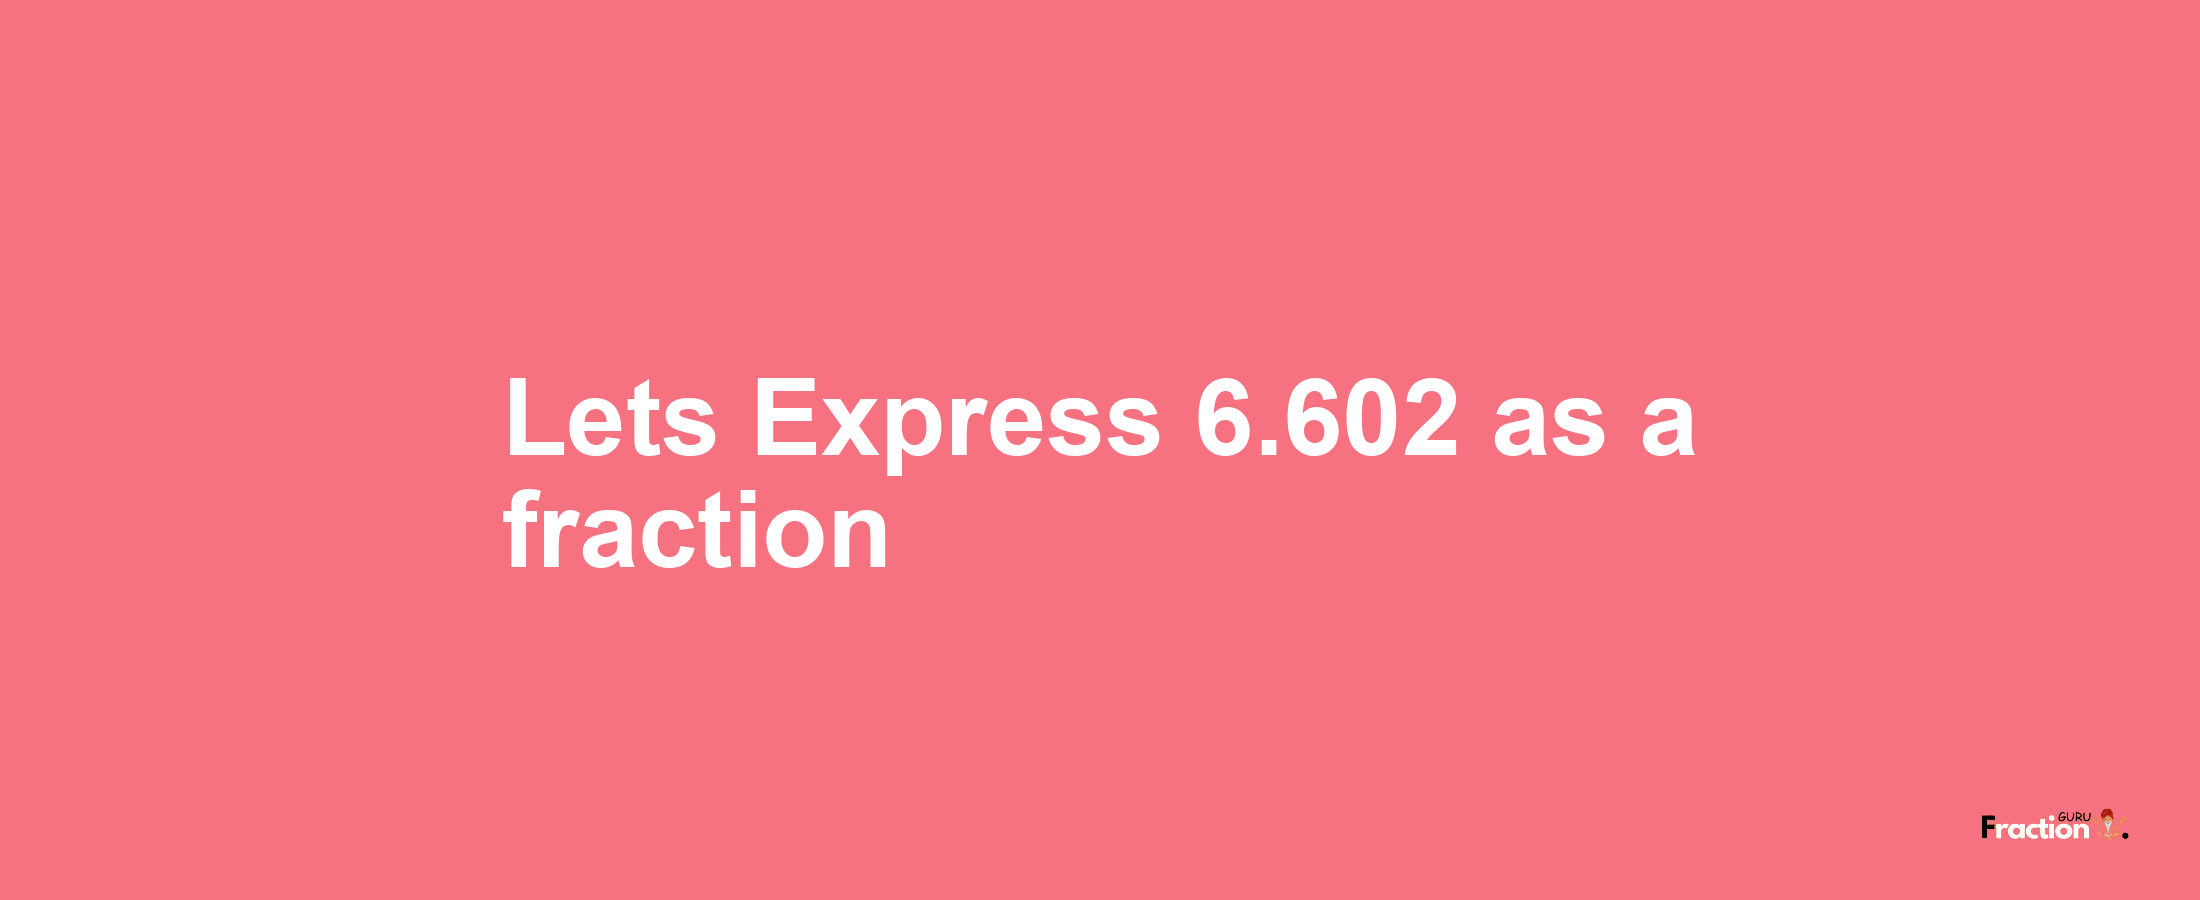 Lets Express 6.602 as afraction